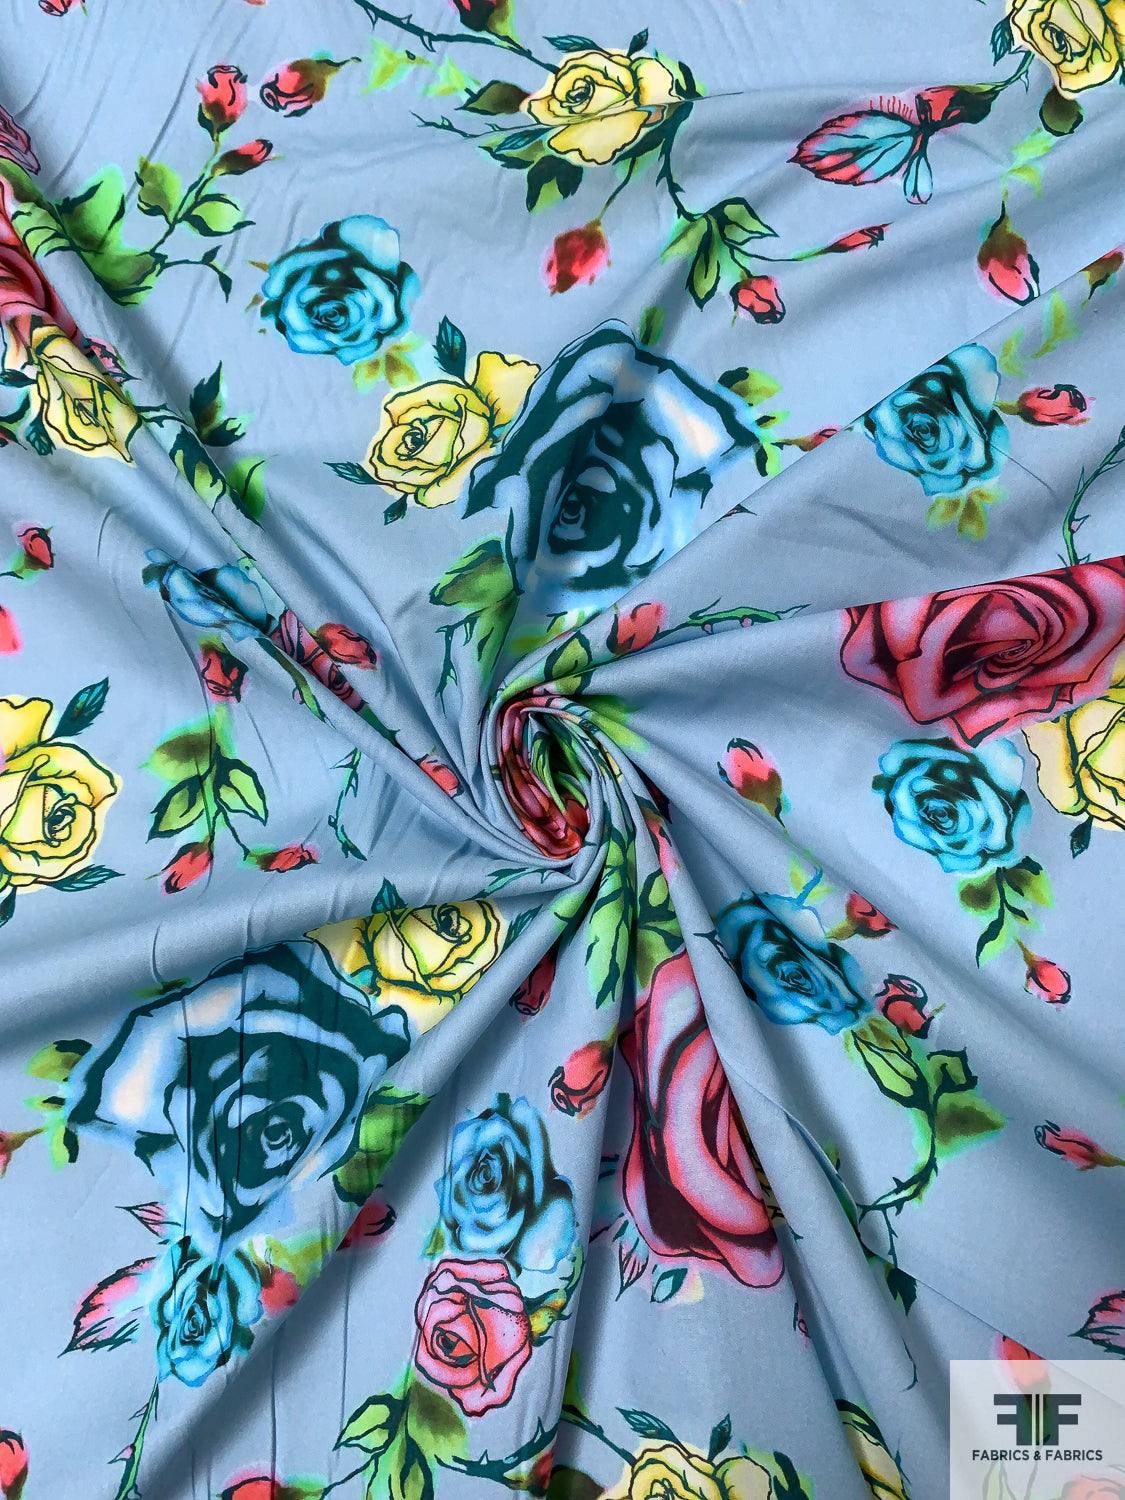 Italian Floral Printed Stretch Cotton Lawn - Sky Blue / Green / Teal /  Yellow / Pink - Fabric by the Yard